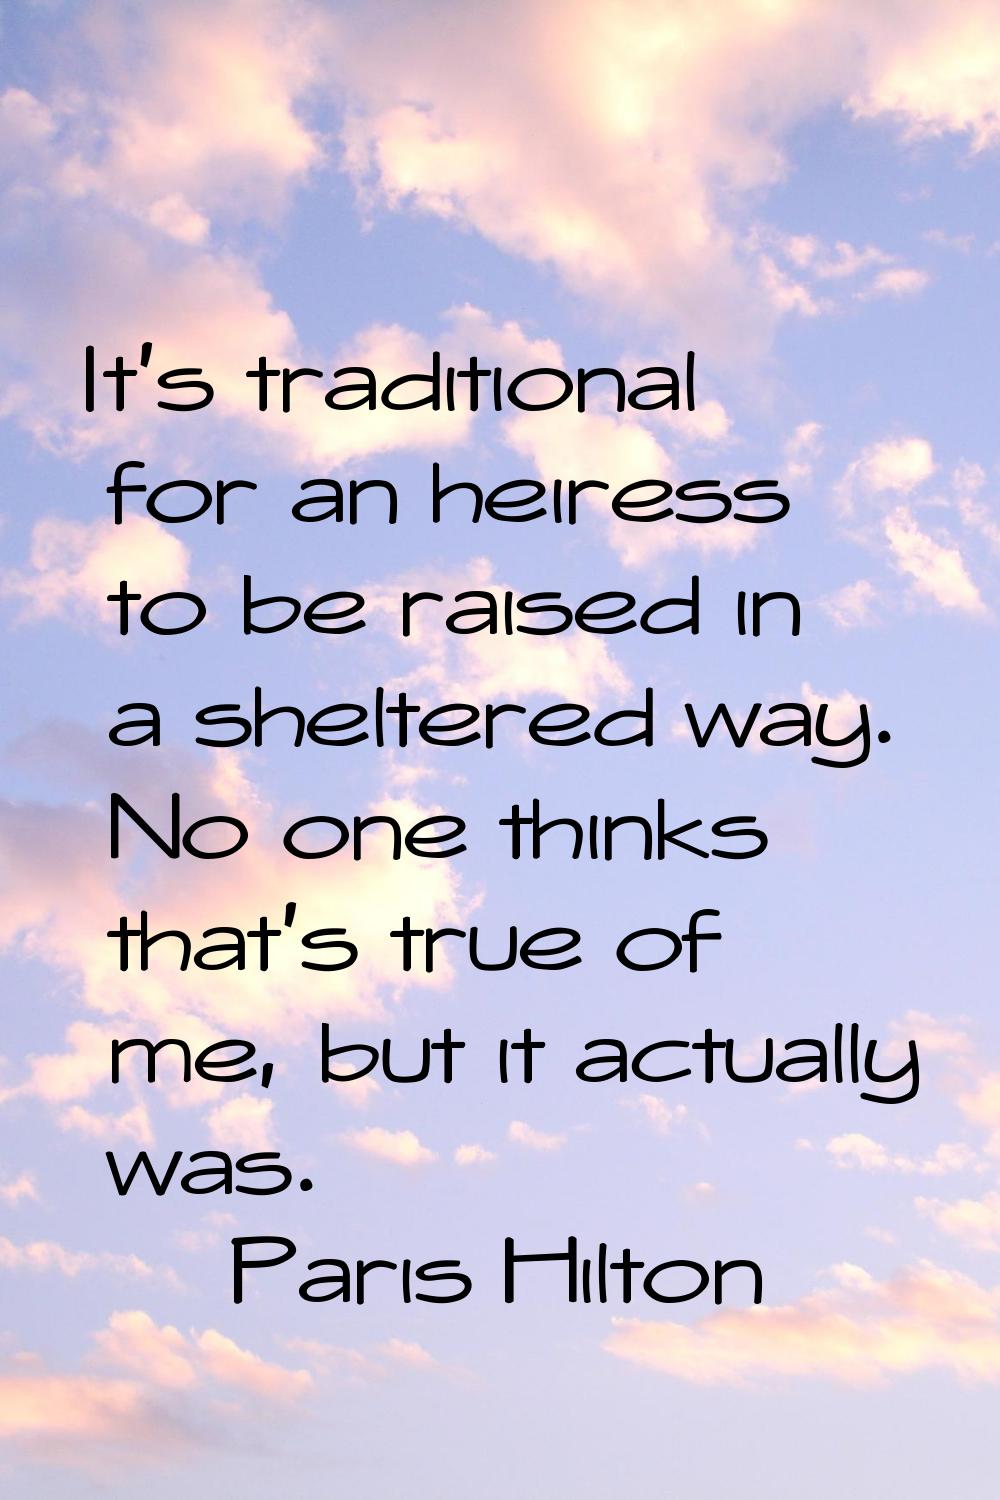 It's traditional for an heiress to be raised in a sheltered way. No one thinks that's true of me, b